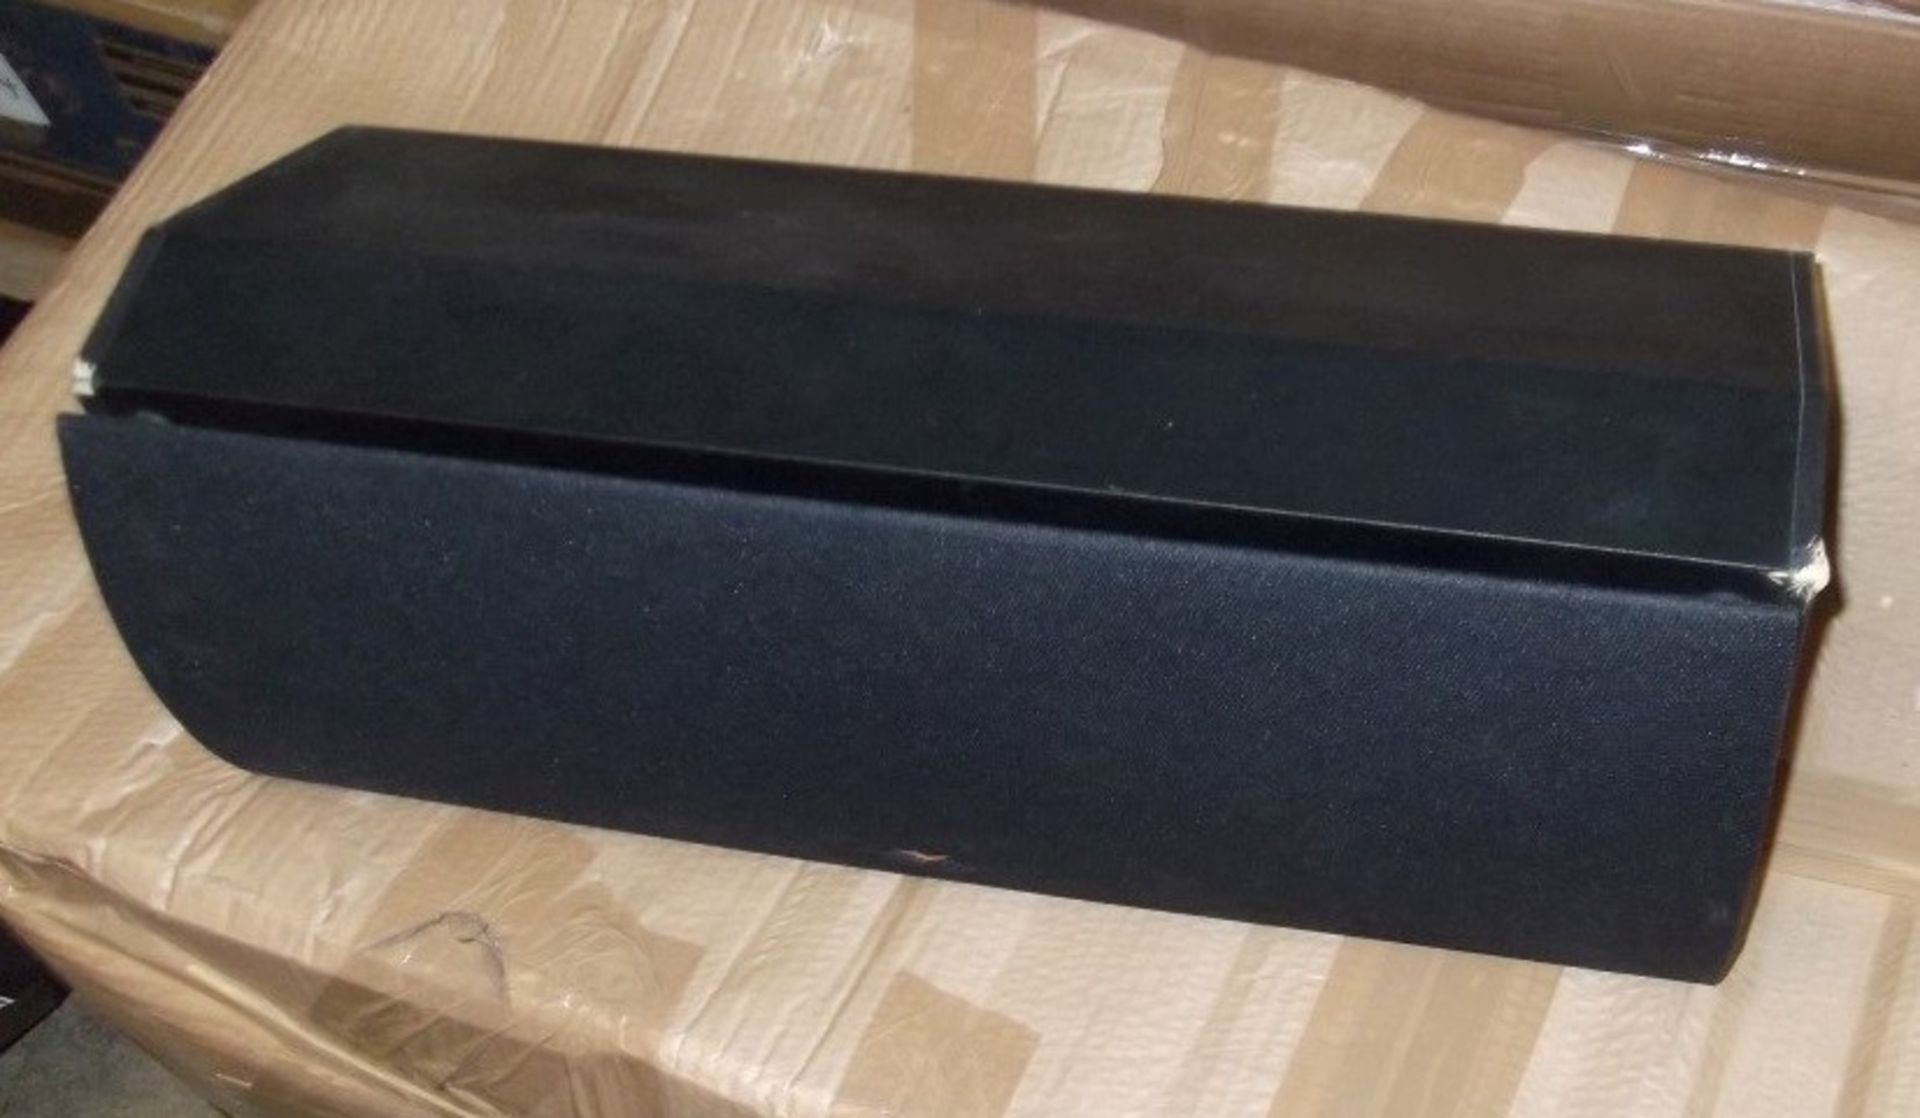 1 x Klipsch SC-1 Center Speaker - Great Working Condition In Original Box - Home Theatre - Quality - Image 6 of 6